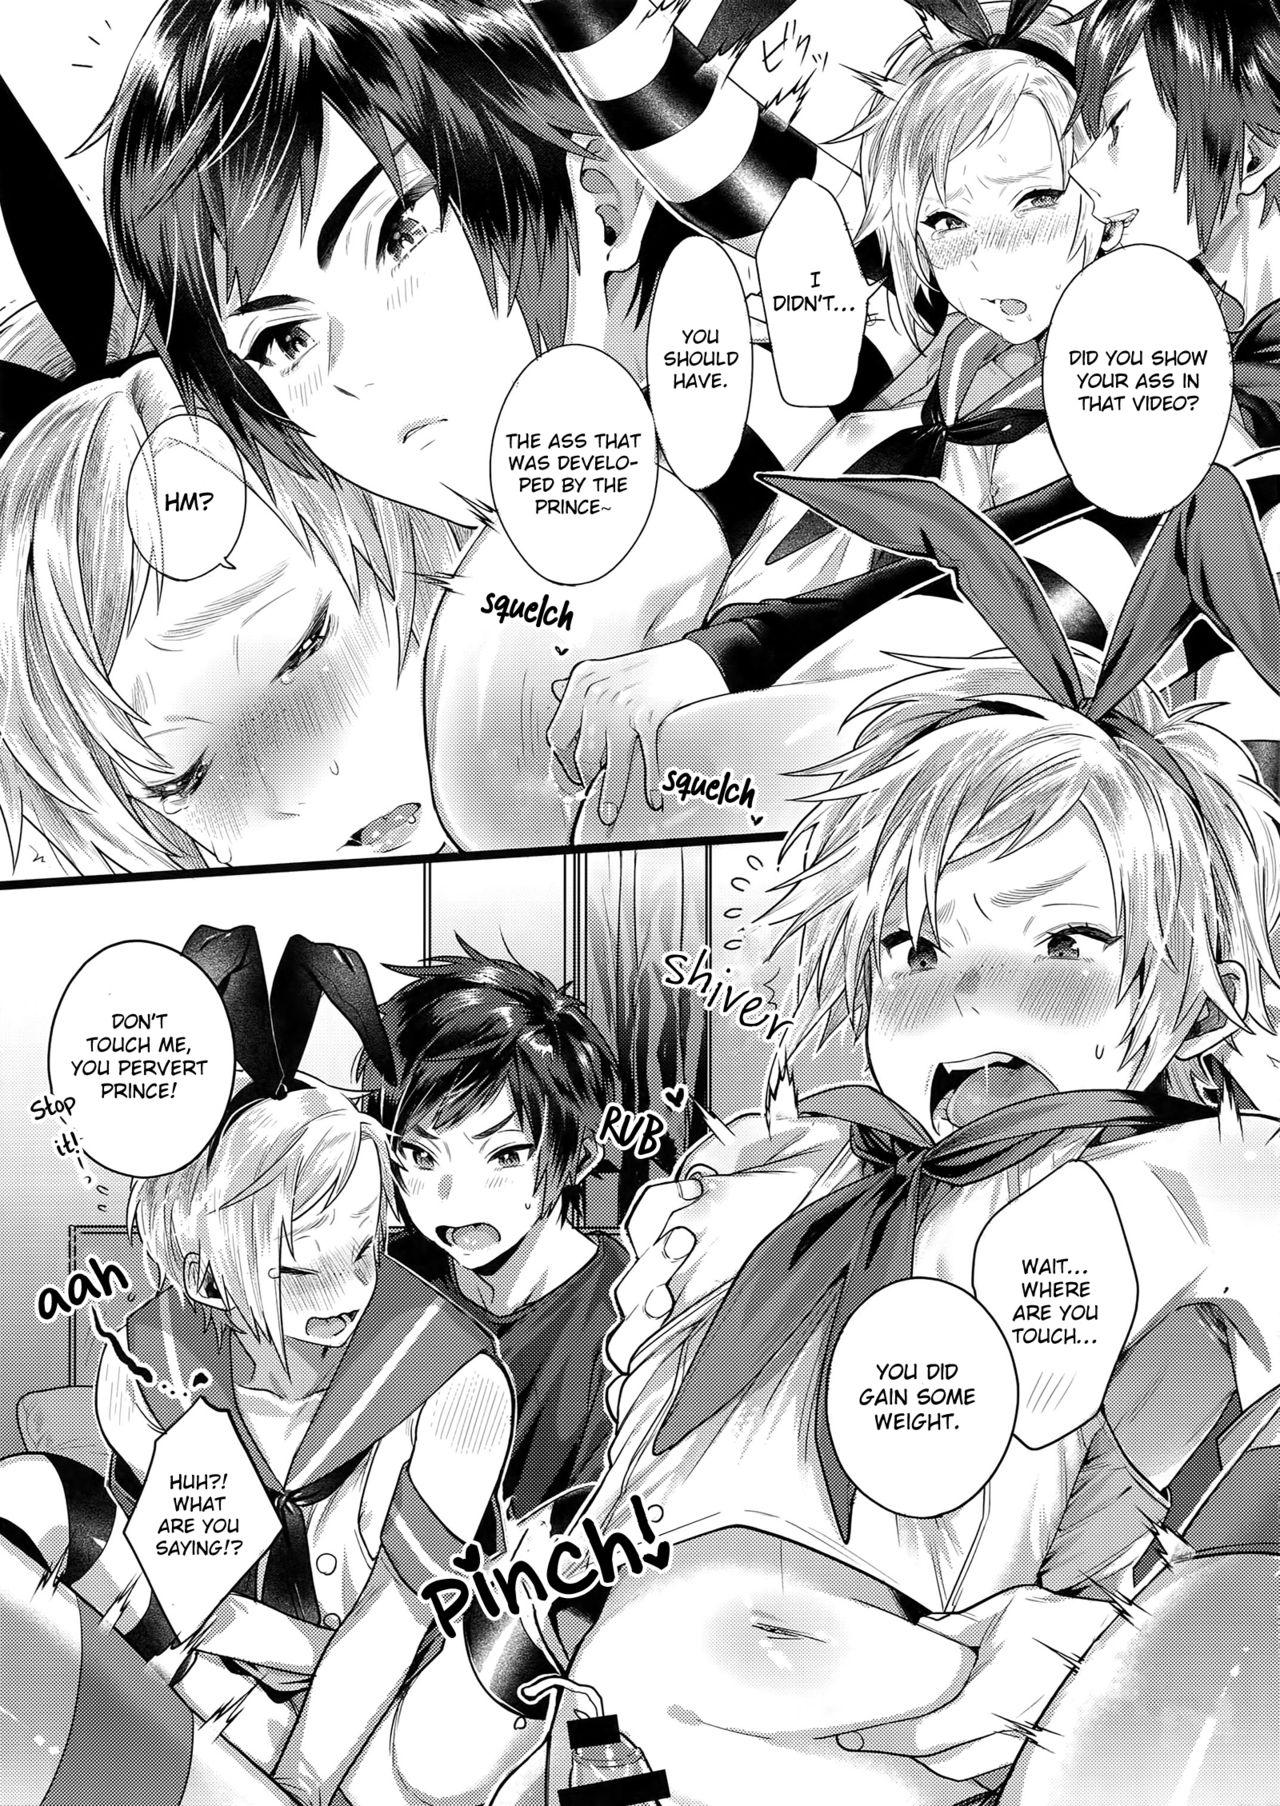 Real Amateur Porn Taikei Iji no Shudan | Prompto Argentum-kun's Means For Maintaining His Body Shape! - Kantai collection Final fantasy xv Free Blow Job - Page 8